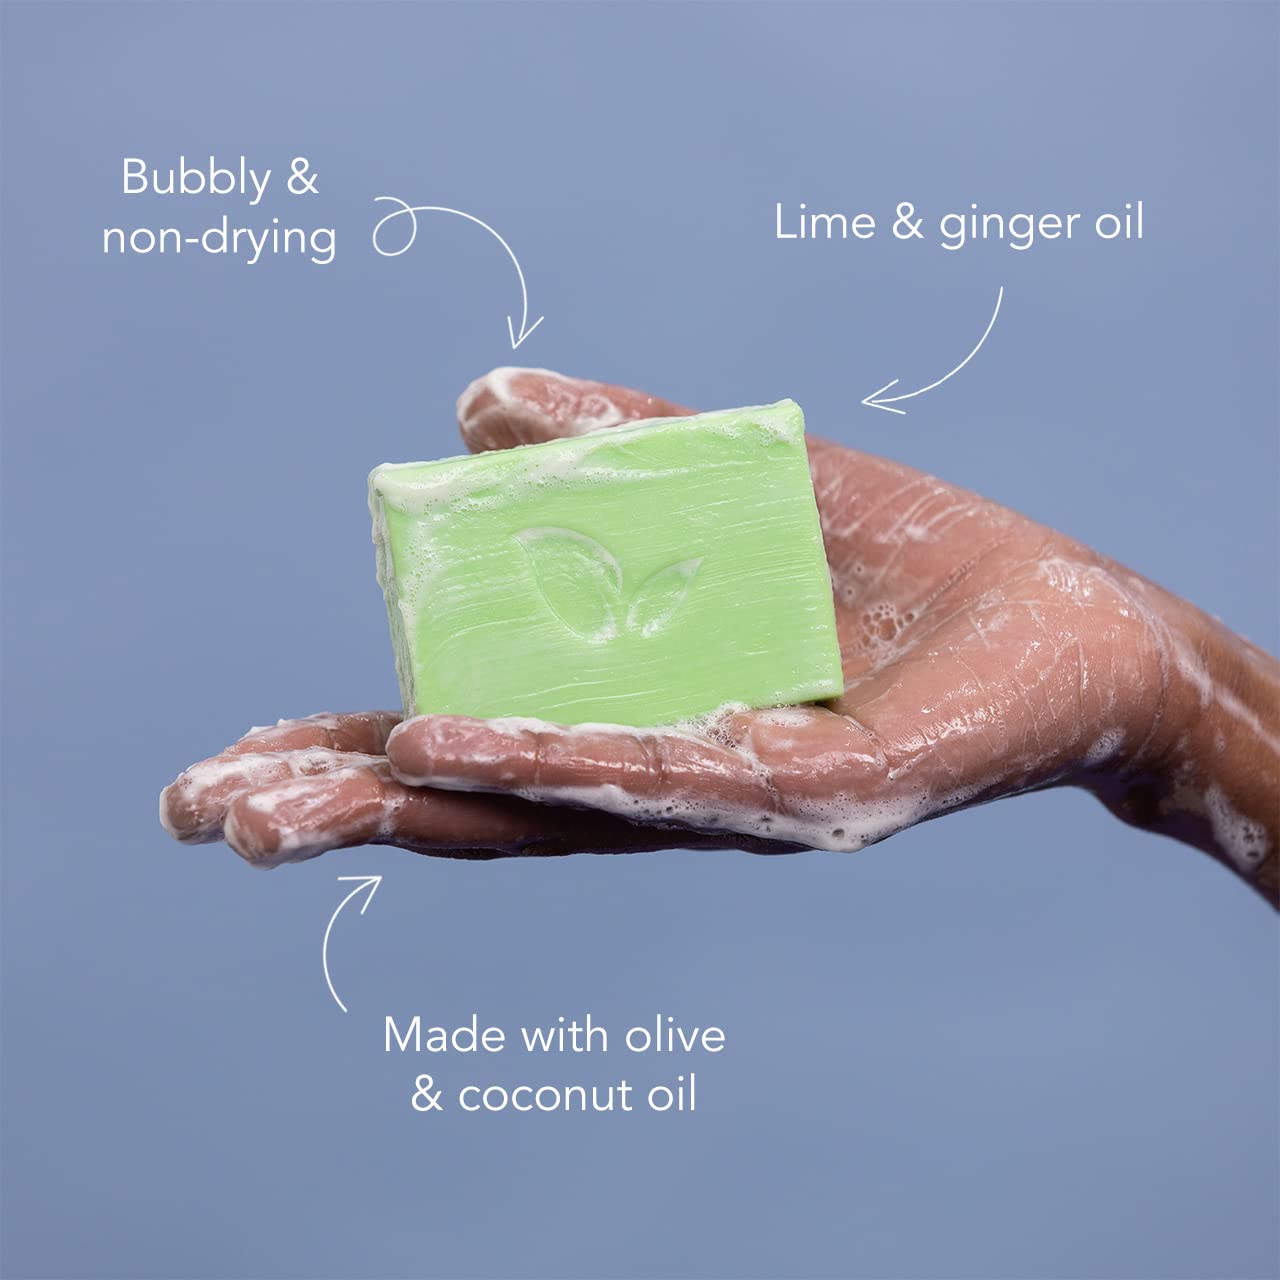 Ethique Zesty Lime & Ginger Soap Bar - Body Wash for All Skin Types - Plastic-Free, Vegan, Cruelty-Free, Eco-Friendly, 4.23 oz (Pack of 1) : Beauty & Personal Care